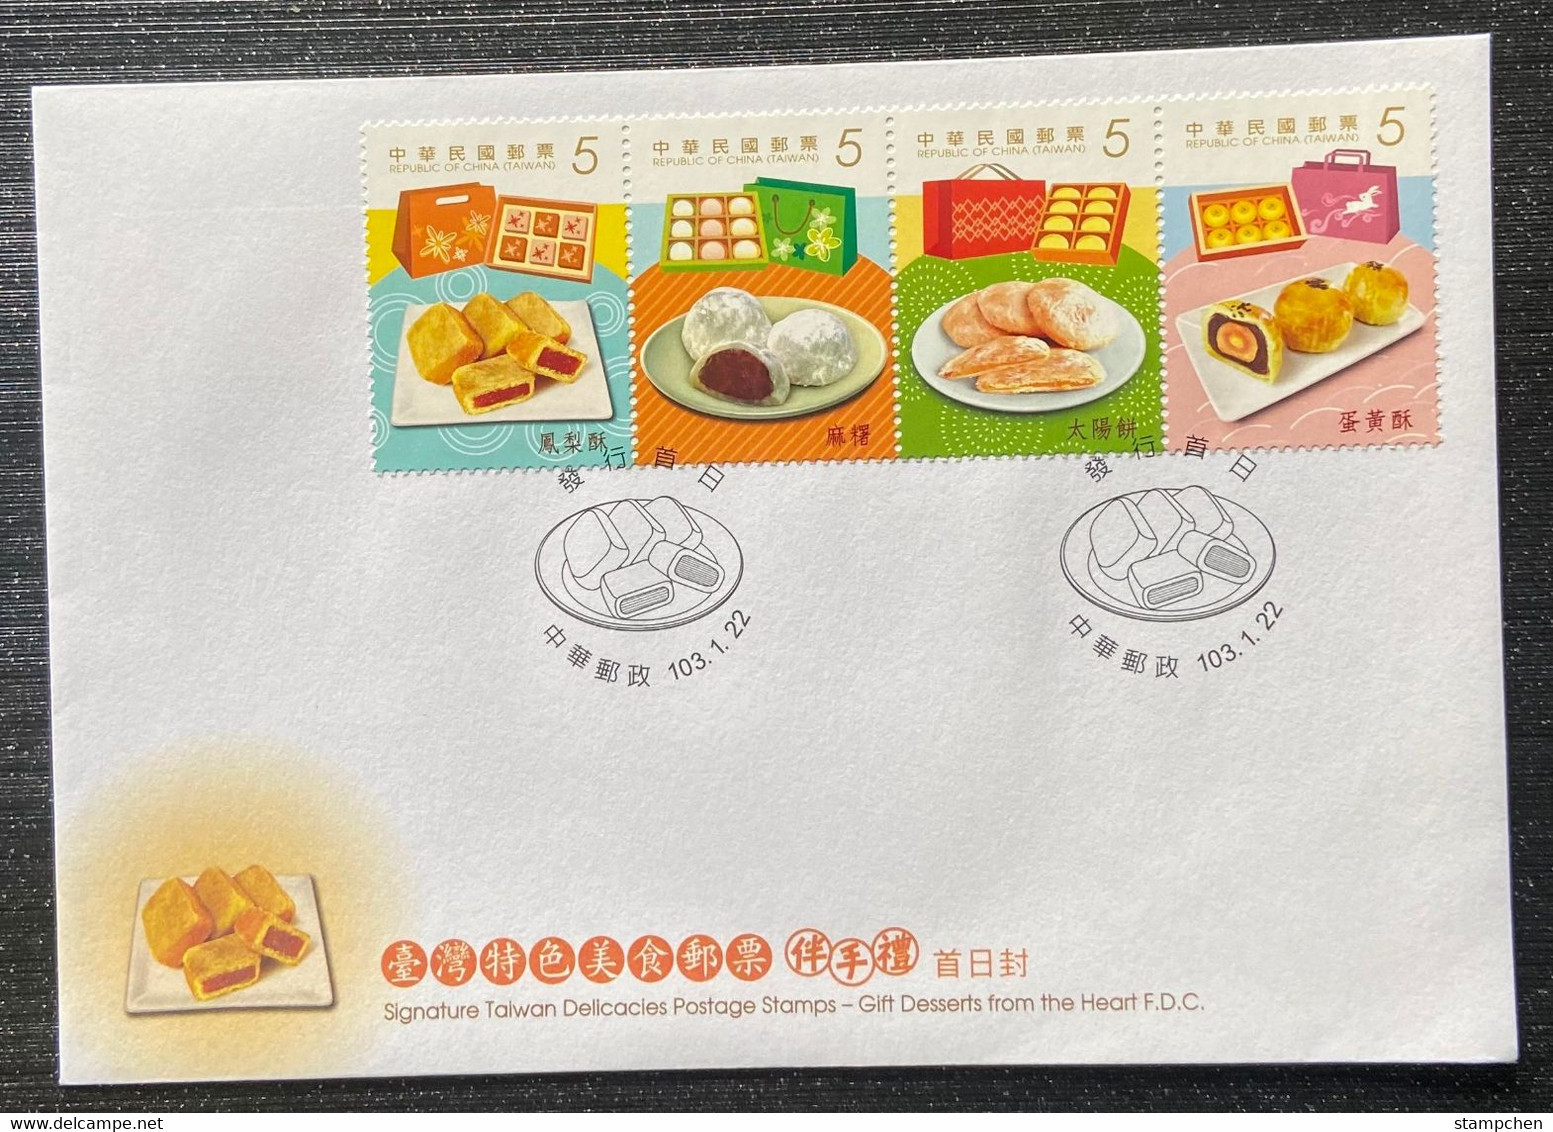 FDC Taiwan 2014 Delicacies-Gift Desserts From Heart Stamps Cuisine Food Pineapple Egg Sugar Rice Cake Gift - FDC